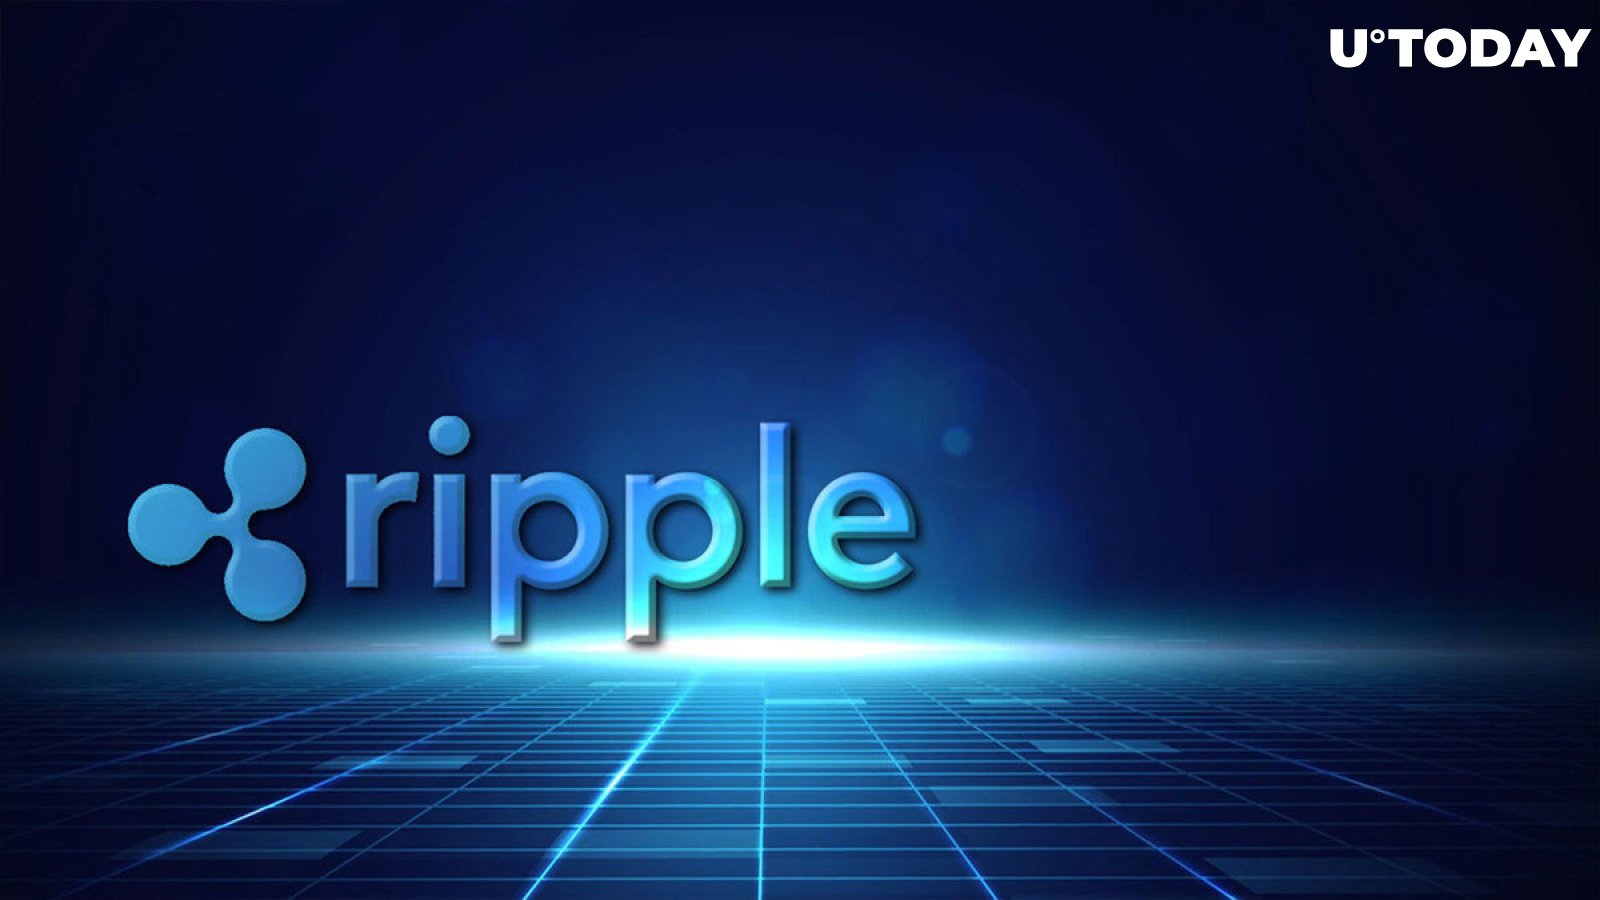 Ripple Plans to Help 3.7 Billion People, Here's How